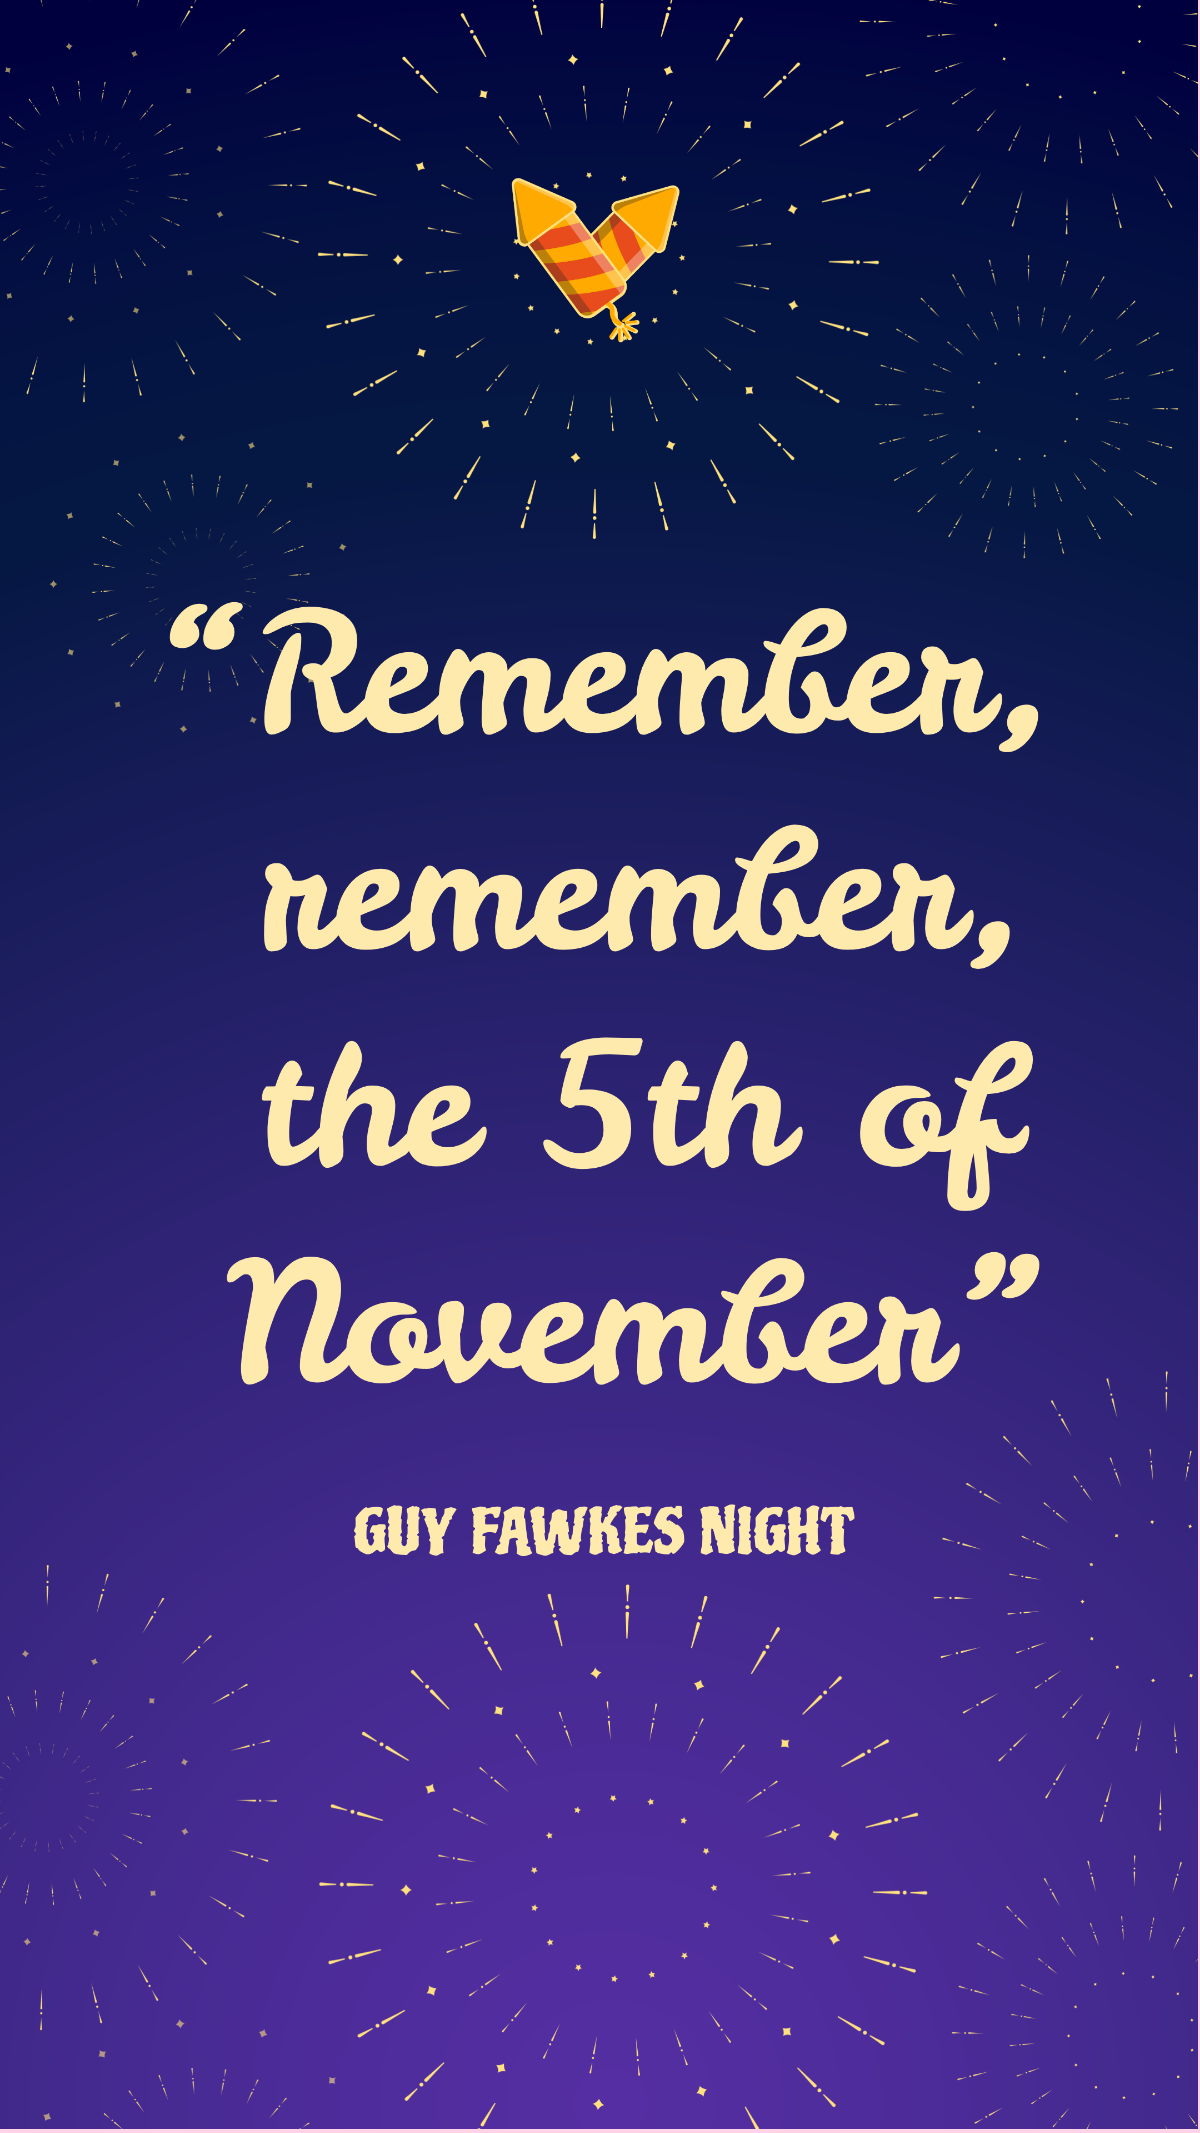 Guy Fawkes Night Quote  Template